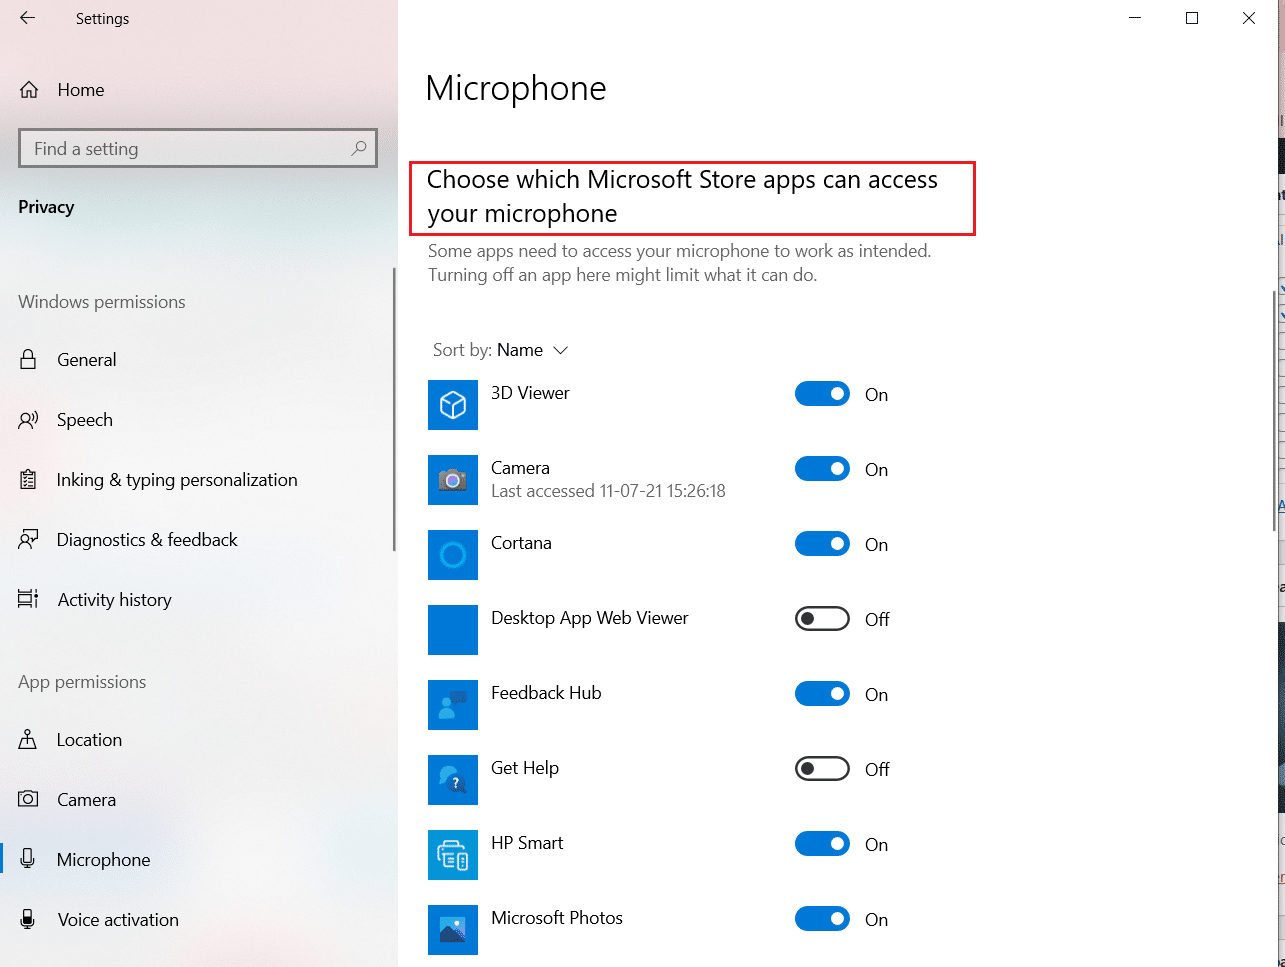 Choose which Microsoft Store Apps can access your microphone